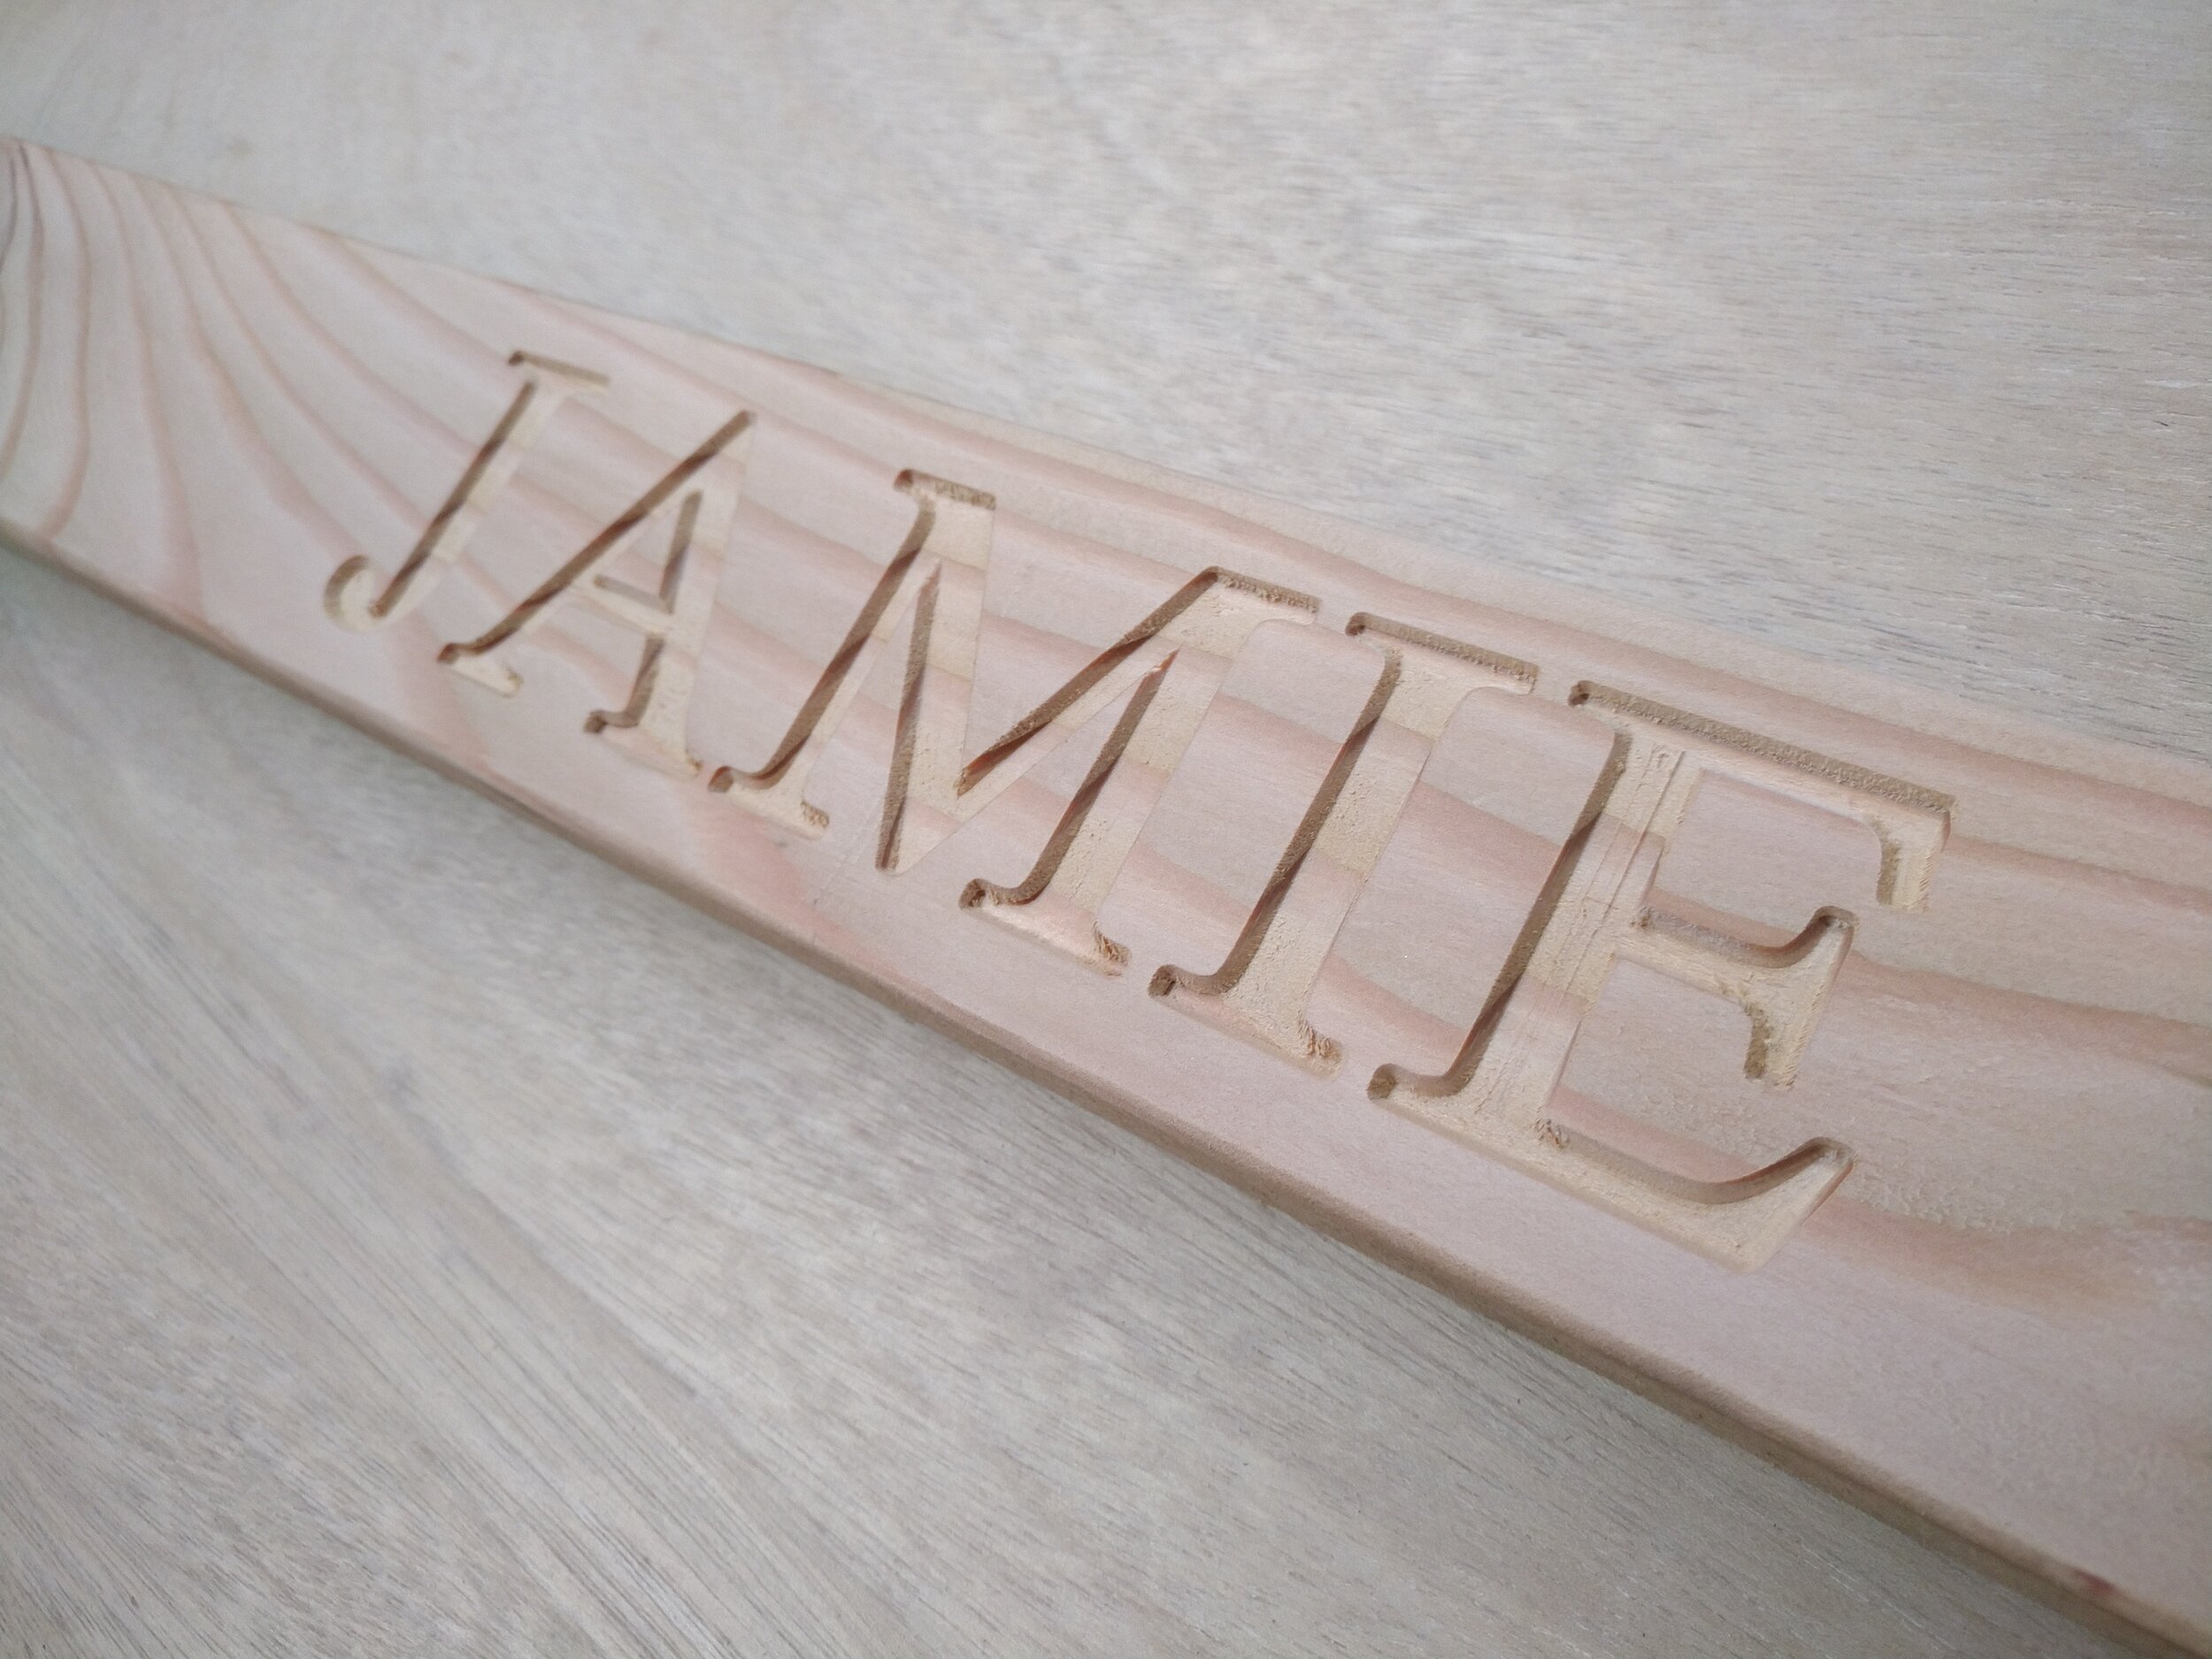 CNC routed larch name plate Jamie-min.jpg